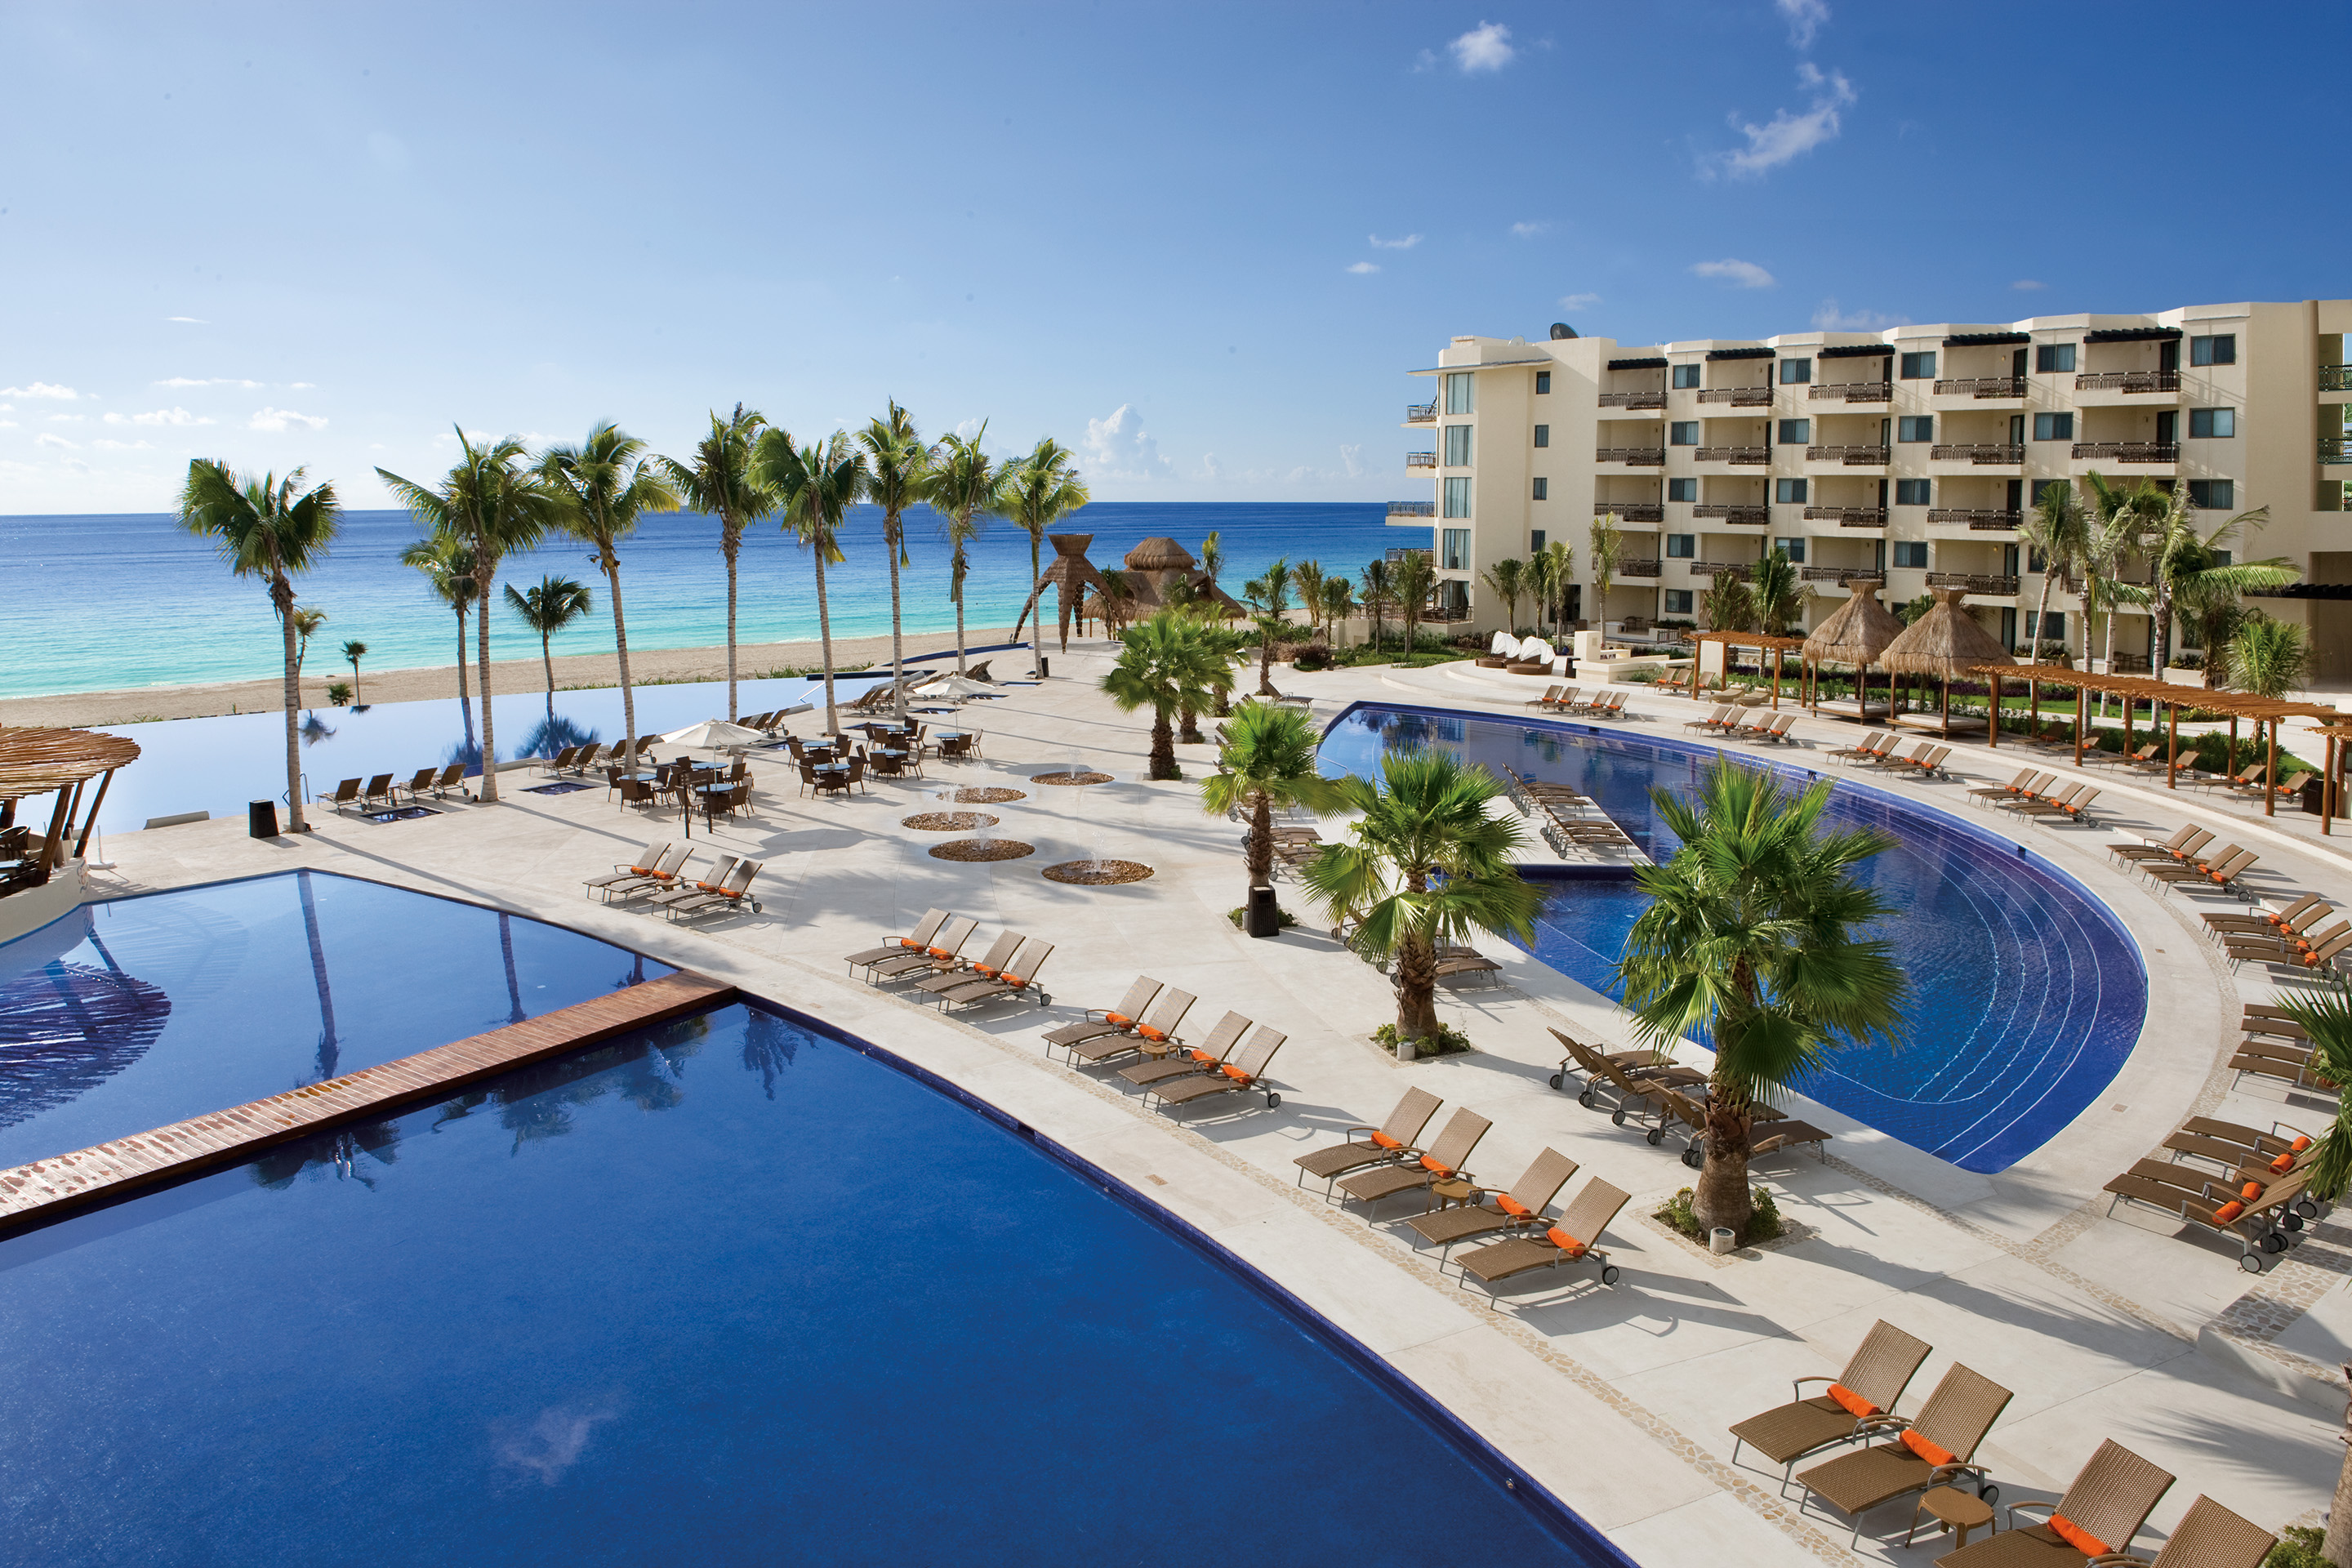 the premier hotel corporation in the Caribbean is by now building earnings